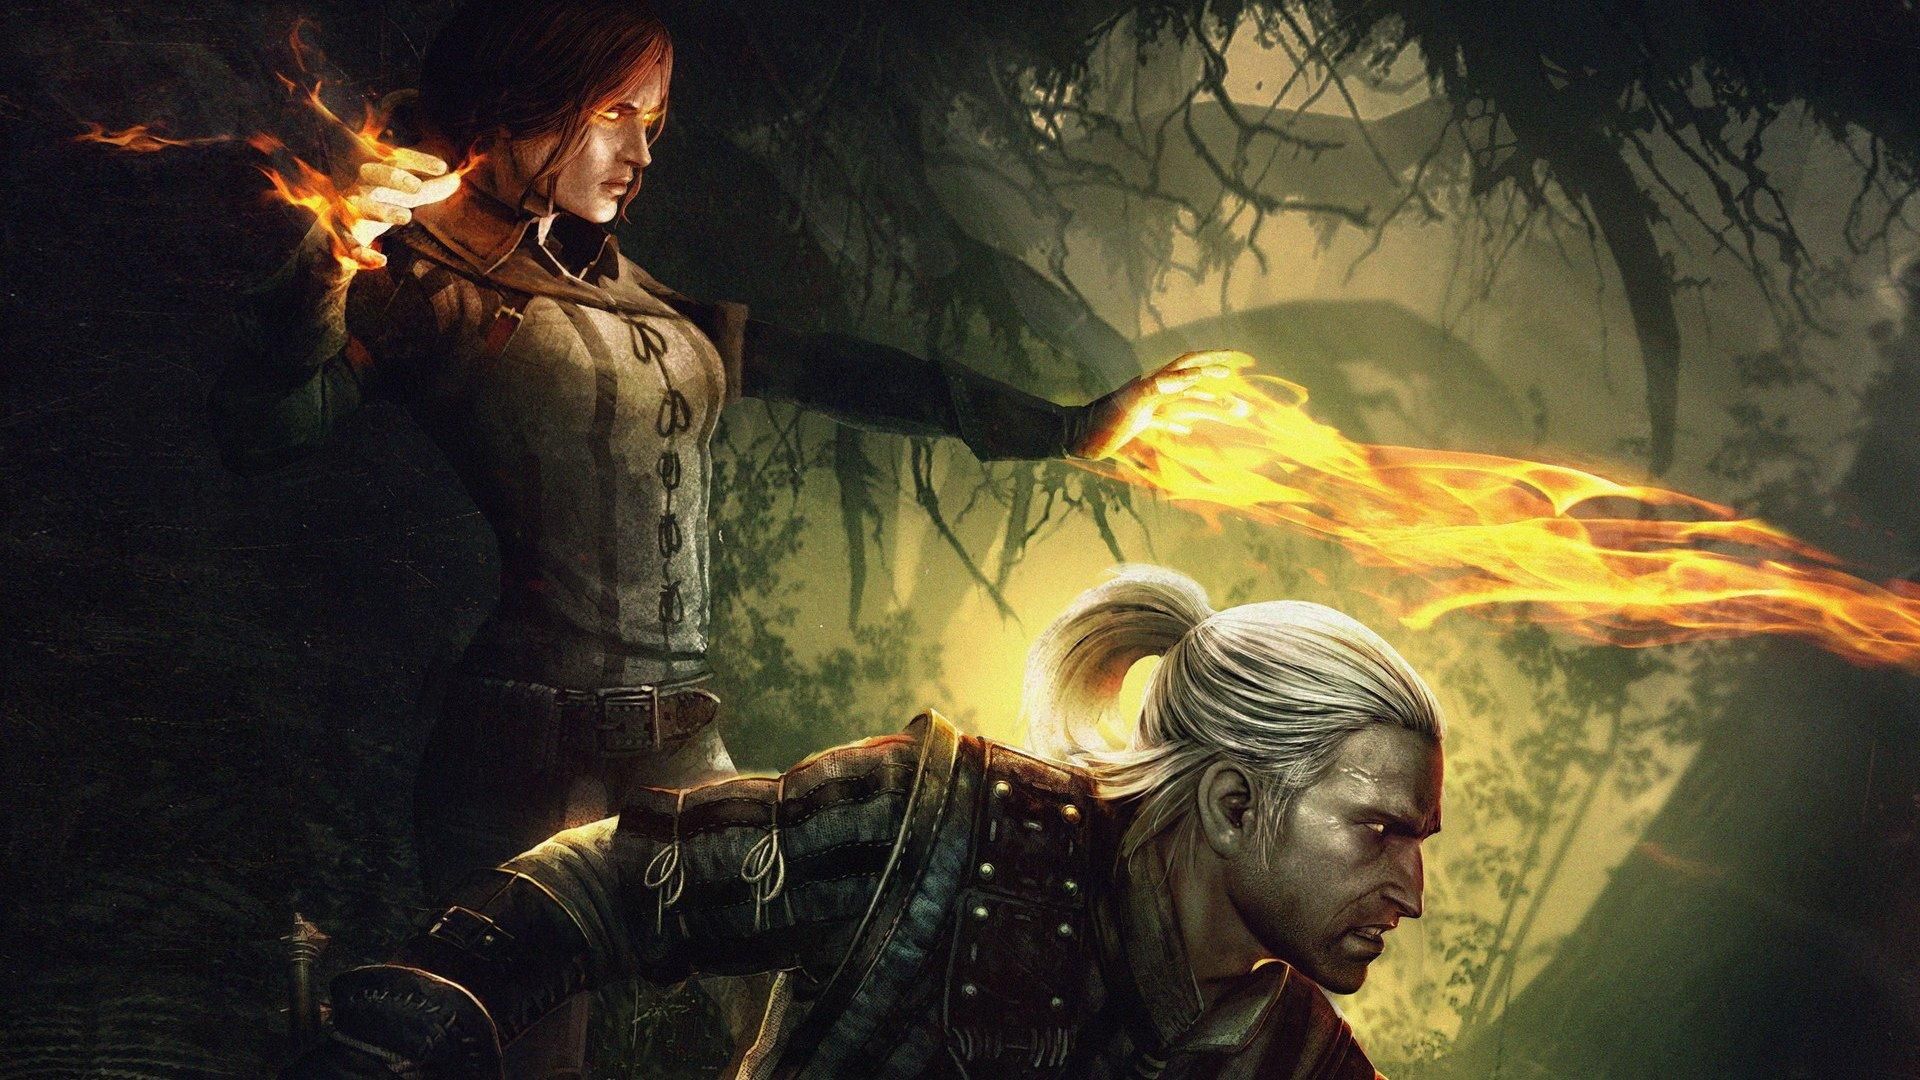 Free download The witcher 2 assassins of kings wallpaper Wallpaper Wide HD [1920x1080] for your Desktop, Mobile & Tablet. Explore Witcher 2 Wallpaper. The Witcher Wallpaper 1920x The Witcher 3 HD Wallpaper, Witcher 3 Wallpaper